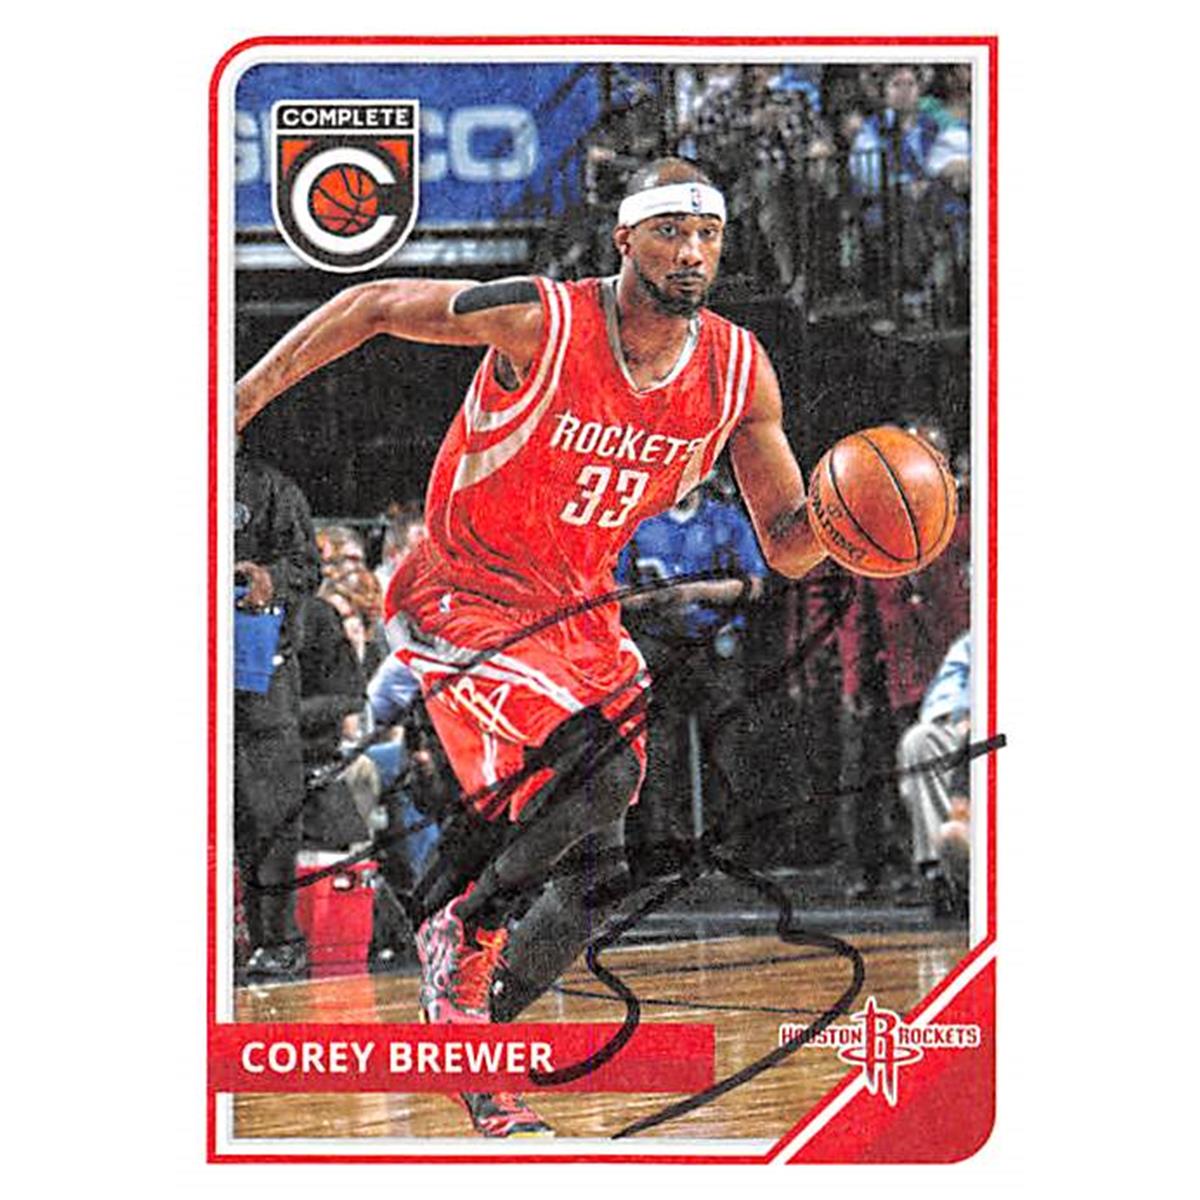 Picture of Autograph Warehouse 388515 Corey Brewer Autographed Basketball Card - Houston Rockets 2015 Panini Complete No.33